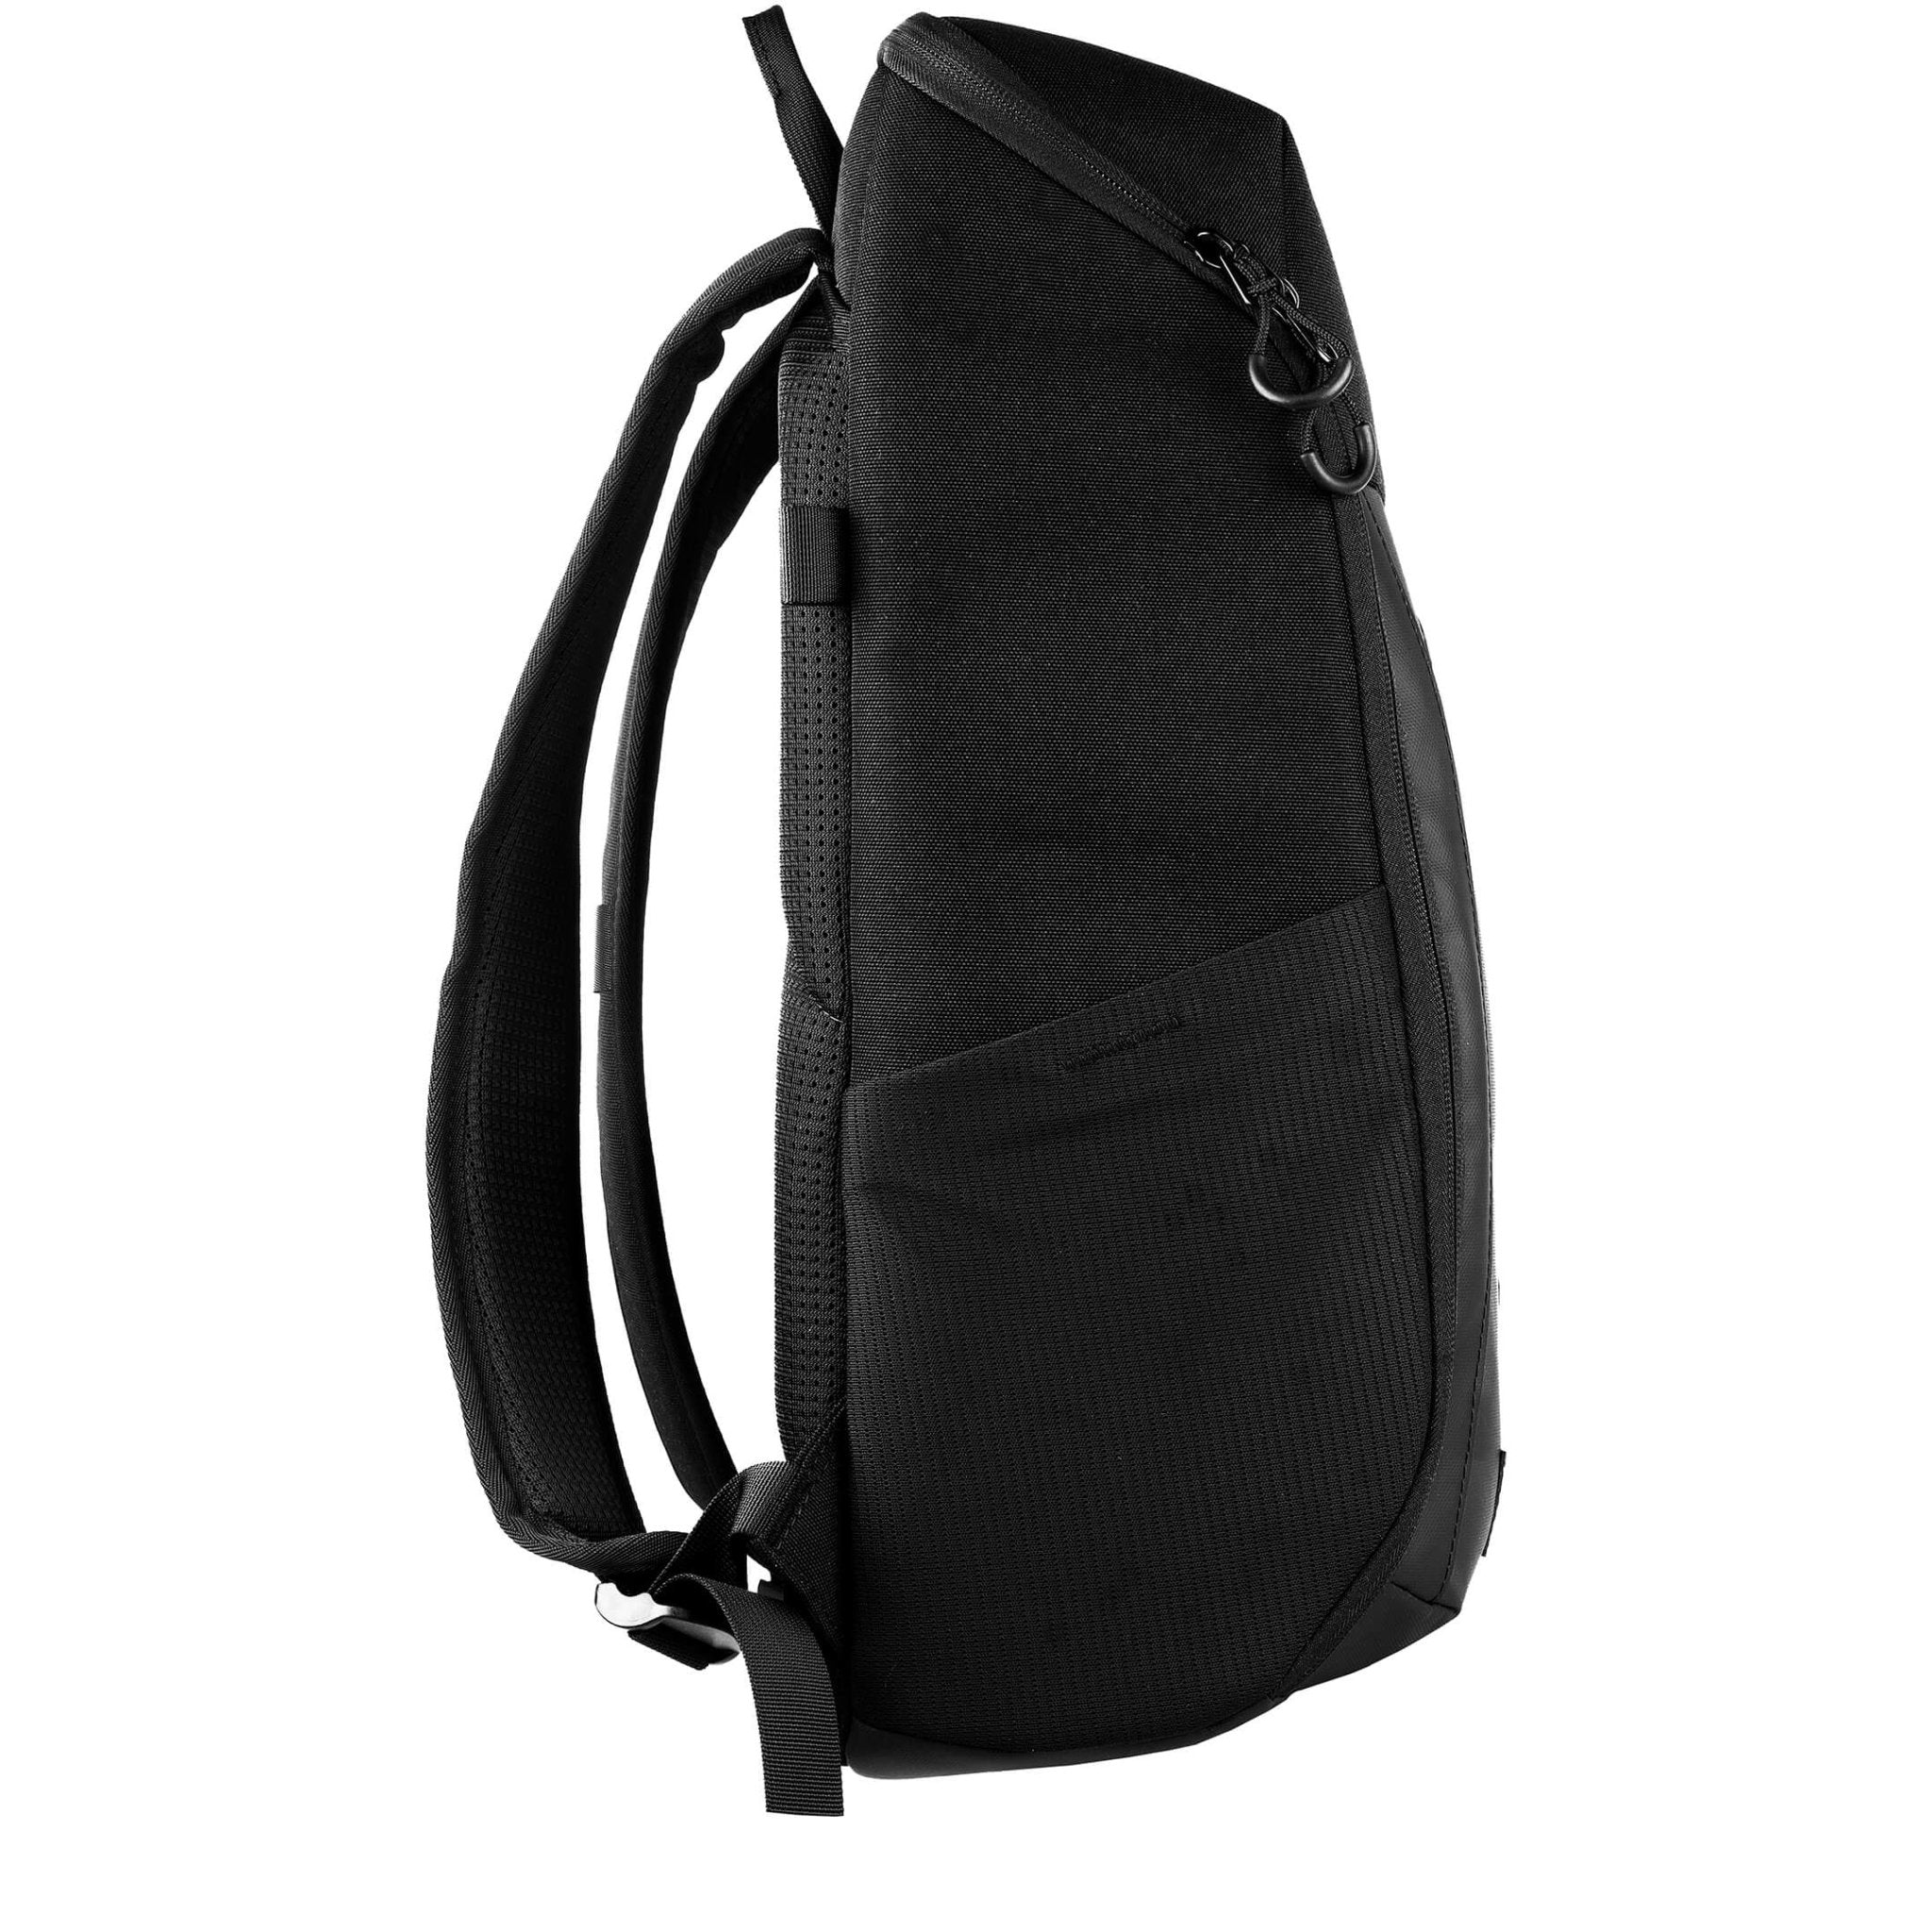 Torvol Urban Backpack - The Ultimate Daily Backpack 2 - Torvol - Drone Authority